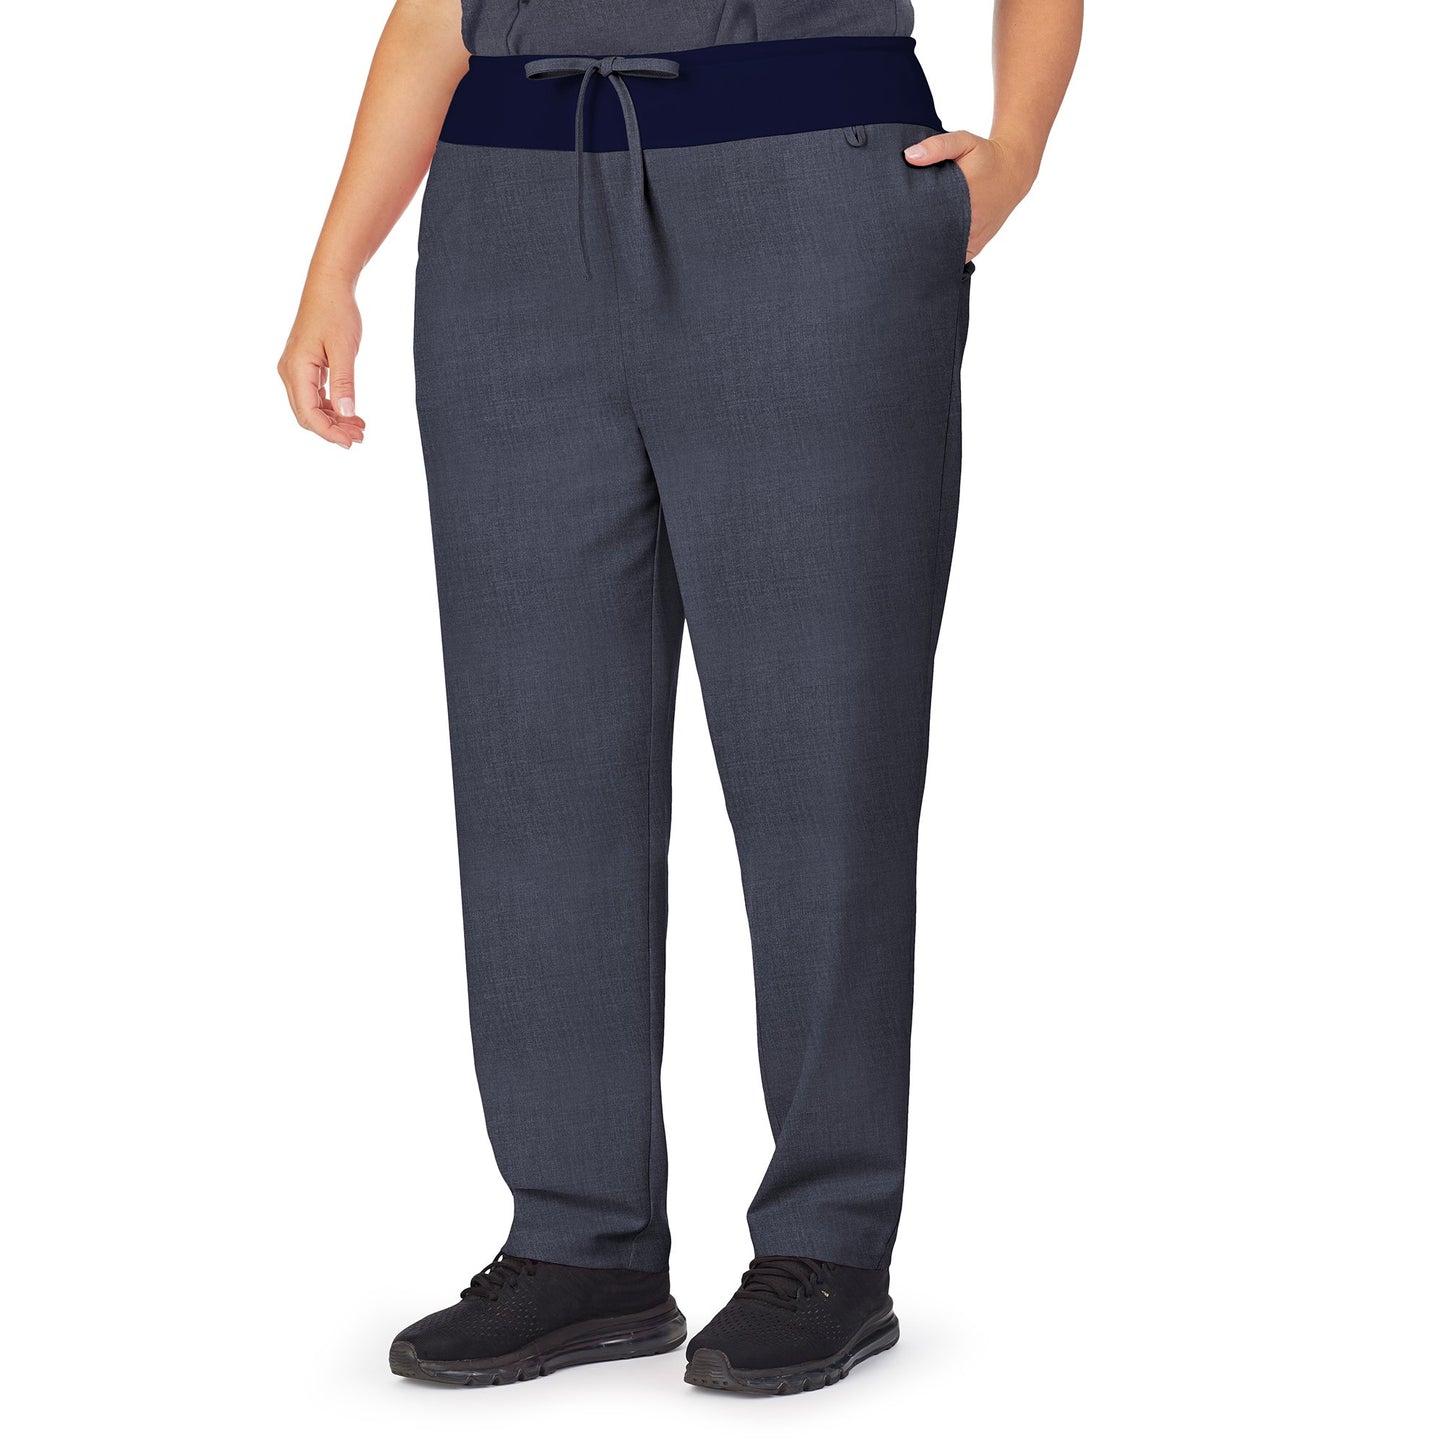 Navy Heather;Model is wearing size 1X. She is 5’9.5”, Bust 43”, Waist 37”, Hips 49.5”.@A lady wearing navy heather scrub classic pant plus.